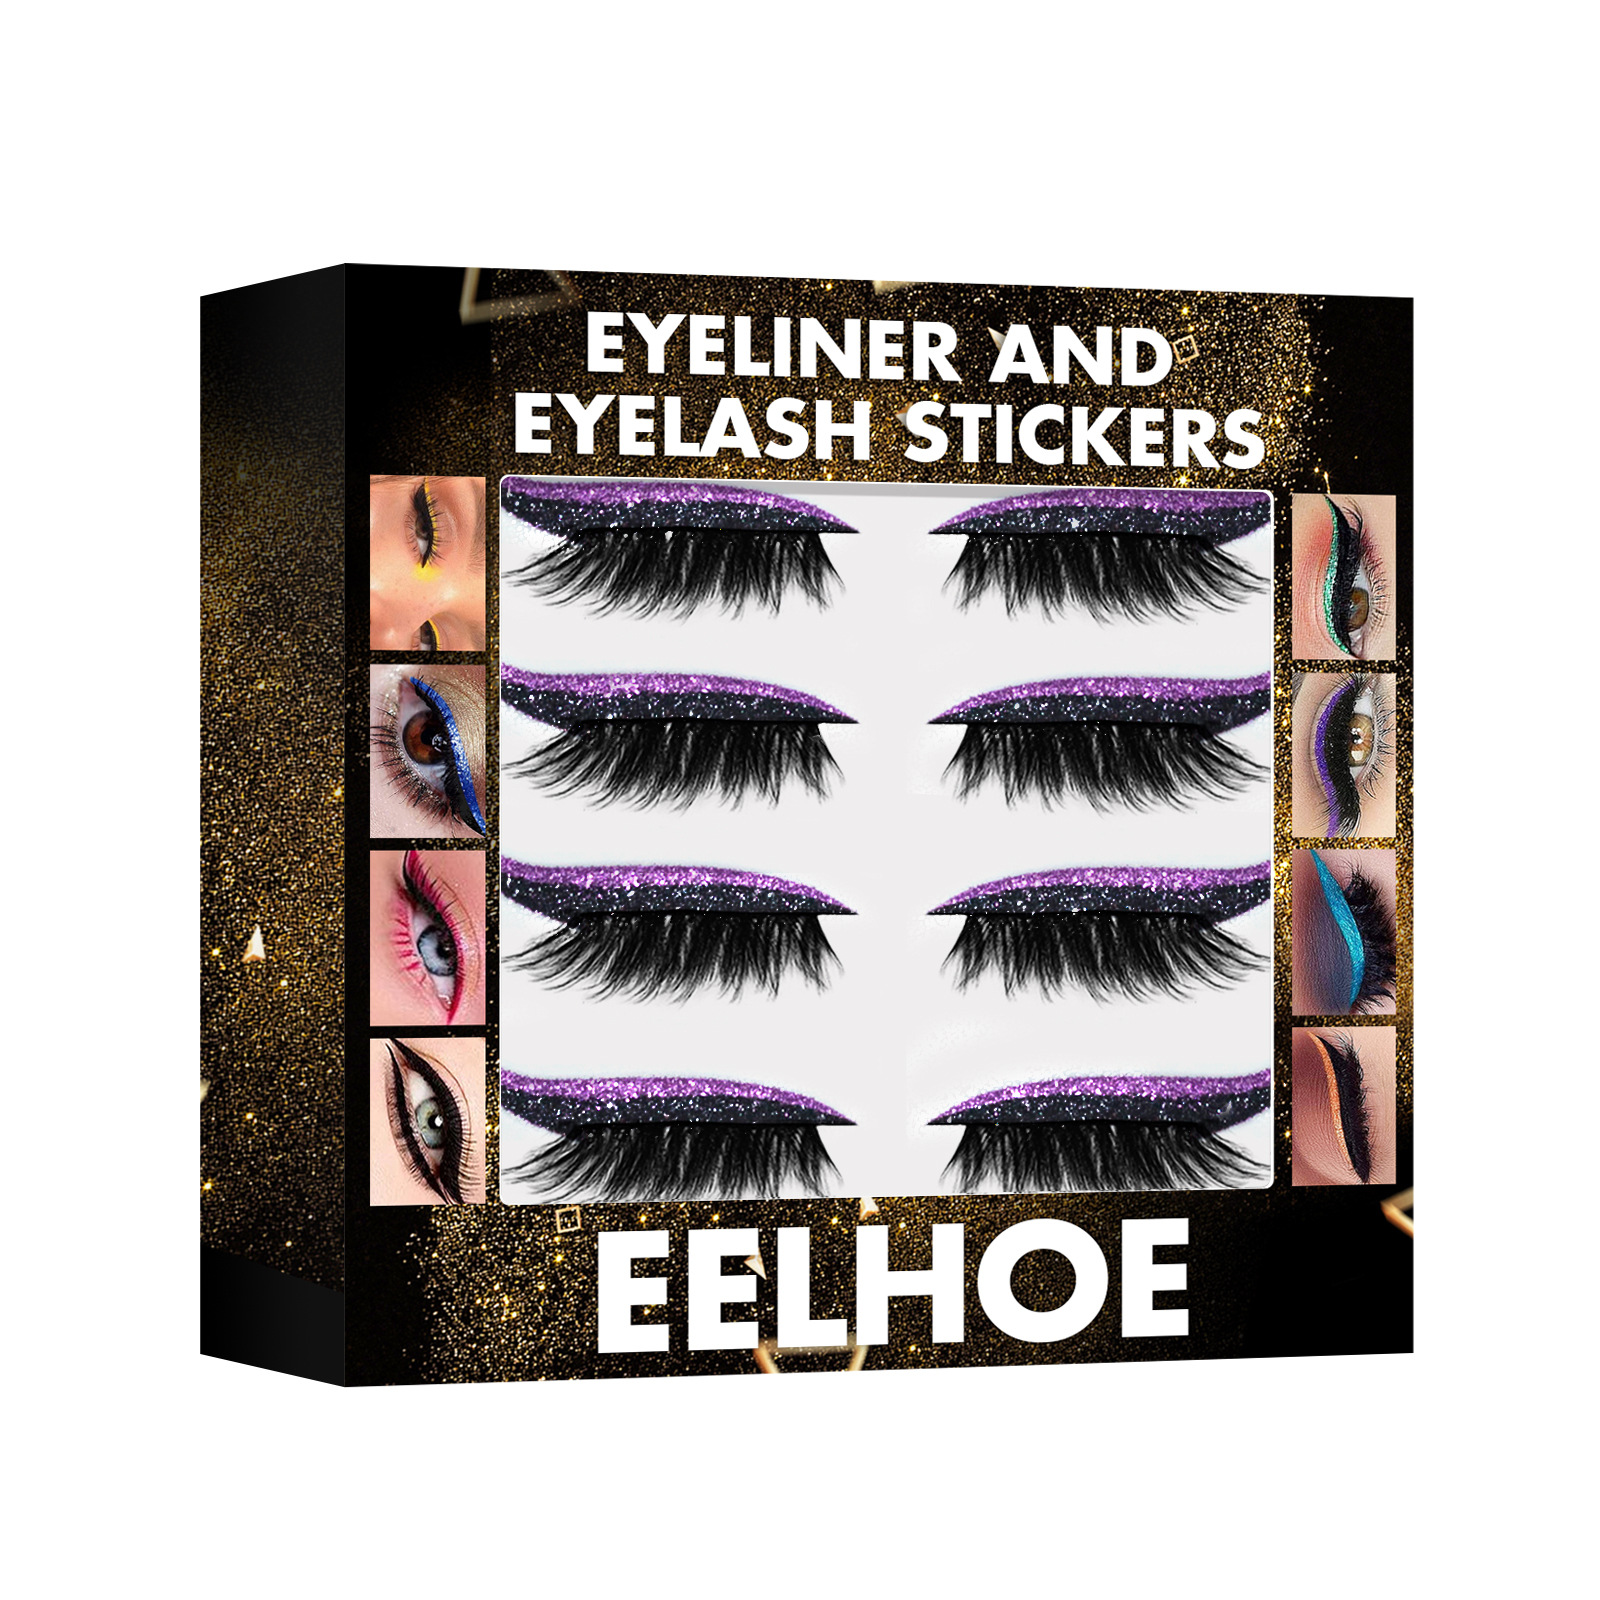 (⚡2022 #1 Best-Selling-50% OFF) Reusable Eyeliner And Eyelash Stickers (Set of 4 pairs)-BUY 4 SETS FREE SHIPPING